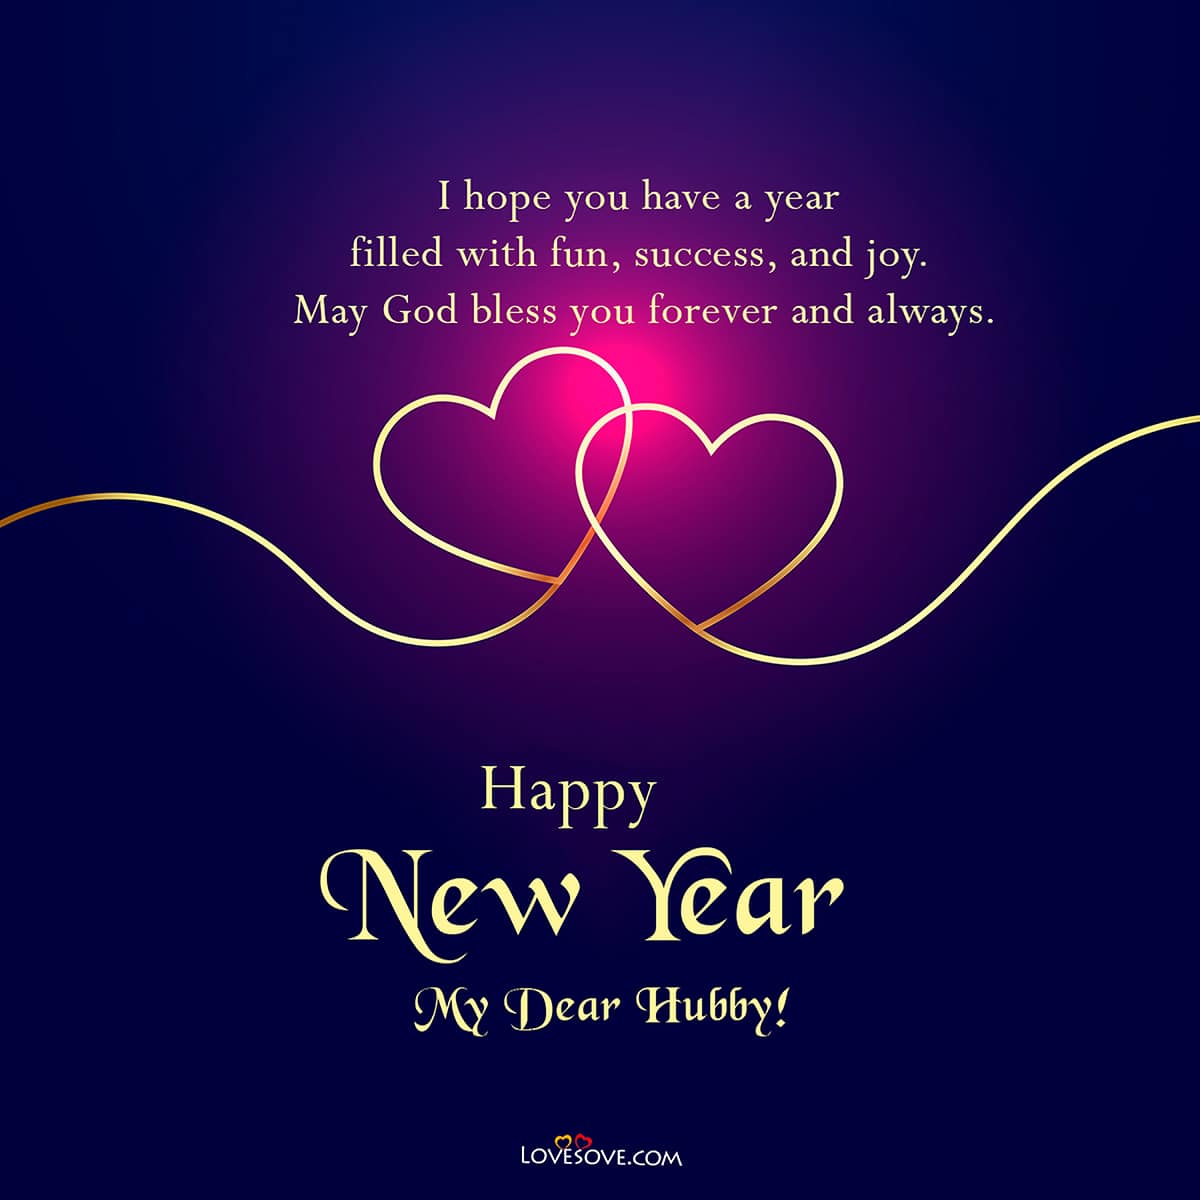  happy new year 2024 wishes in english, happy new year 2023 wishes text, happy new year 2024 wishes in english
